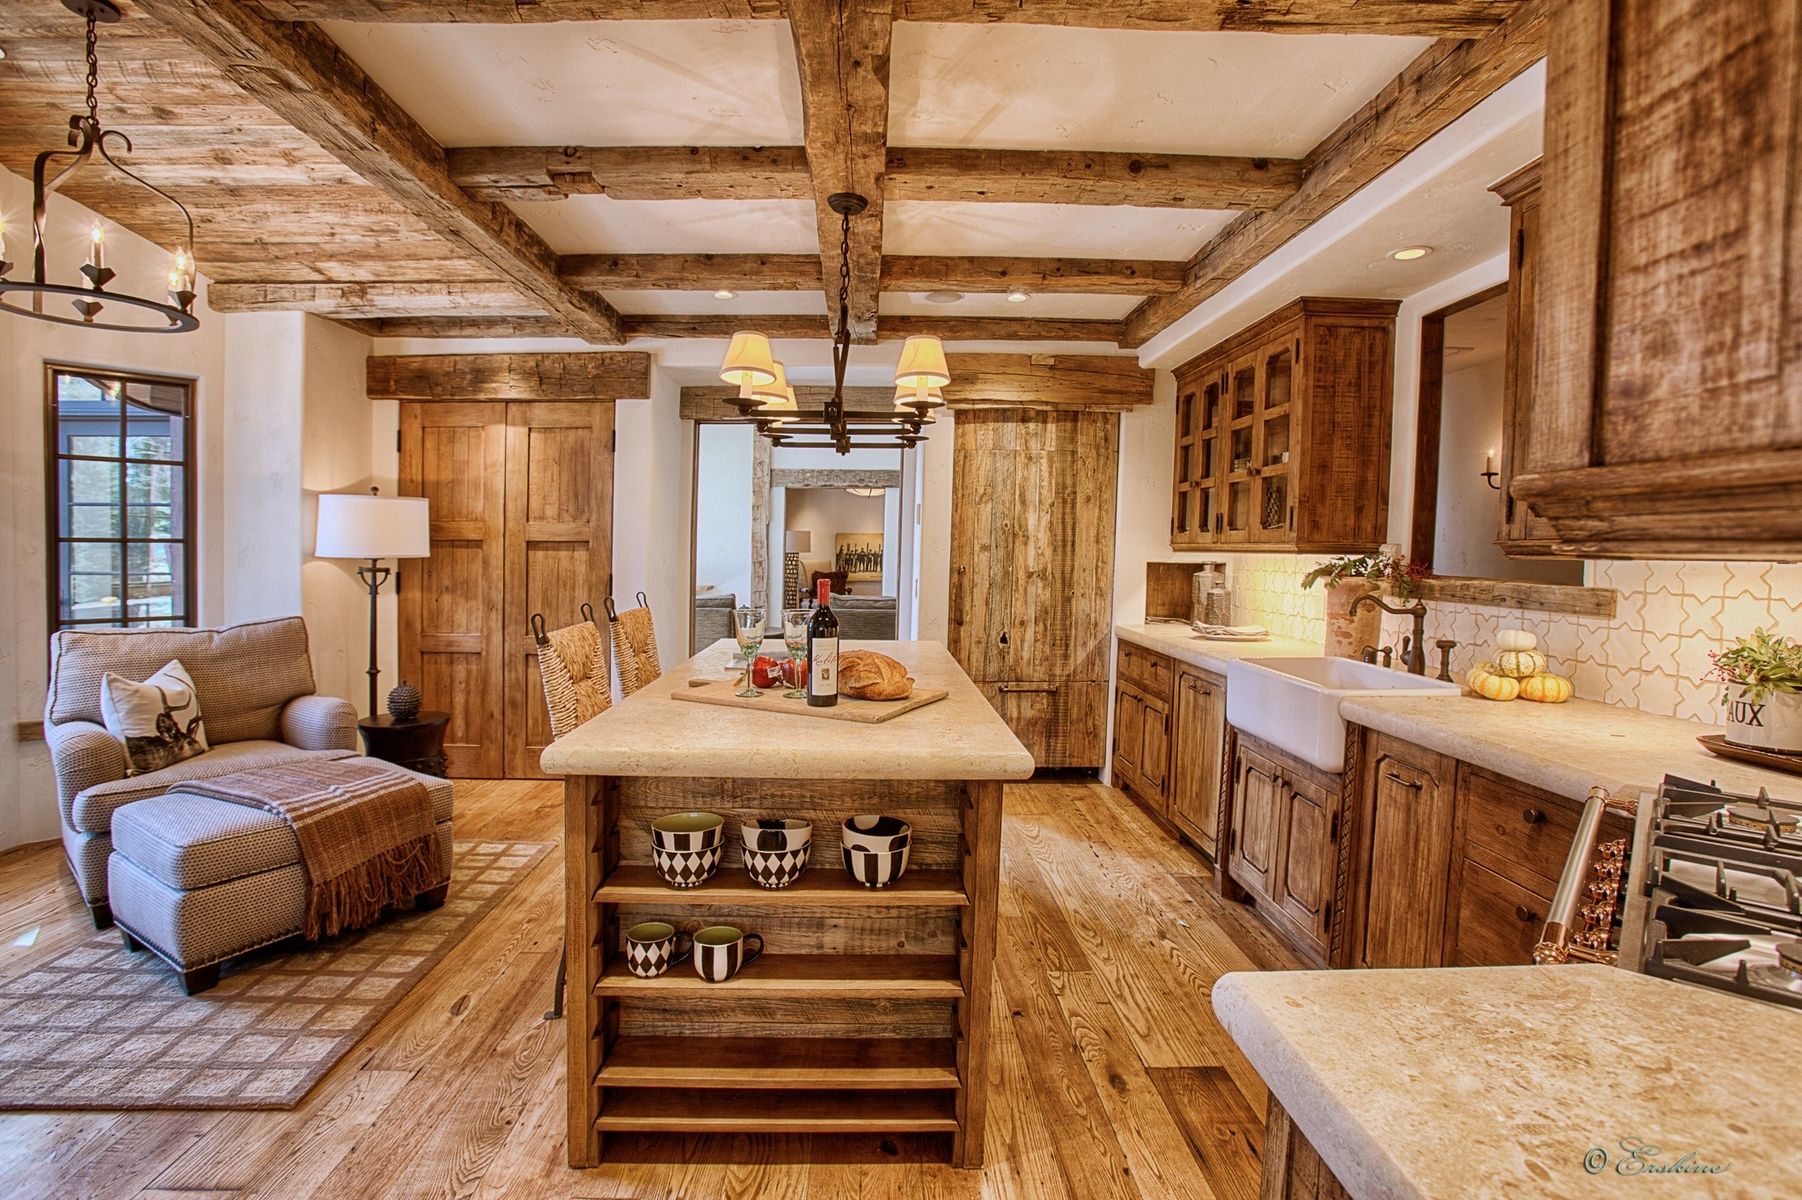 Custom Sugar Pine Kitchen Cabinetry By Bratt Brothers Construction